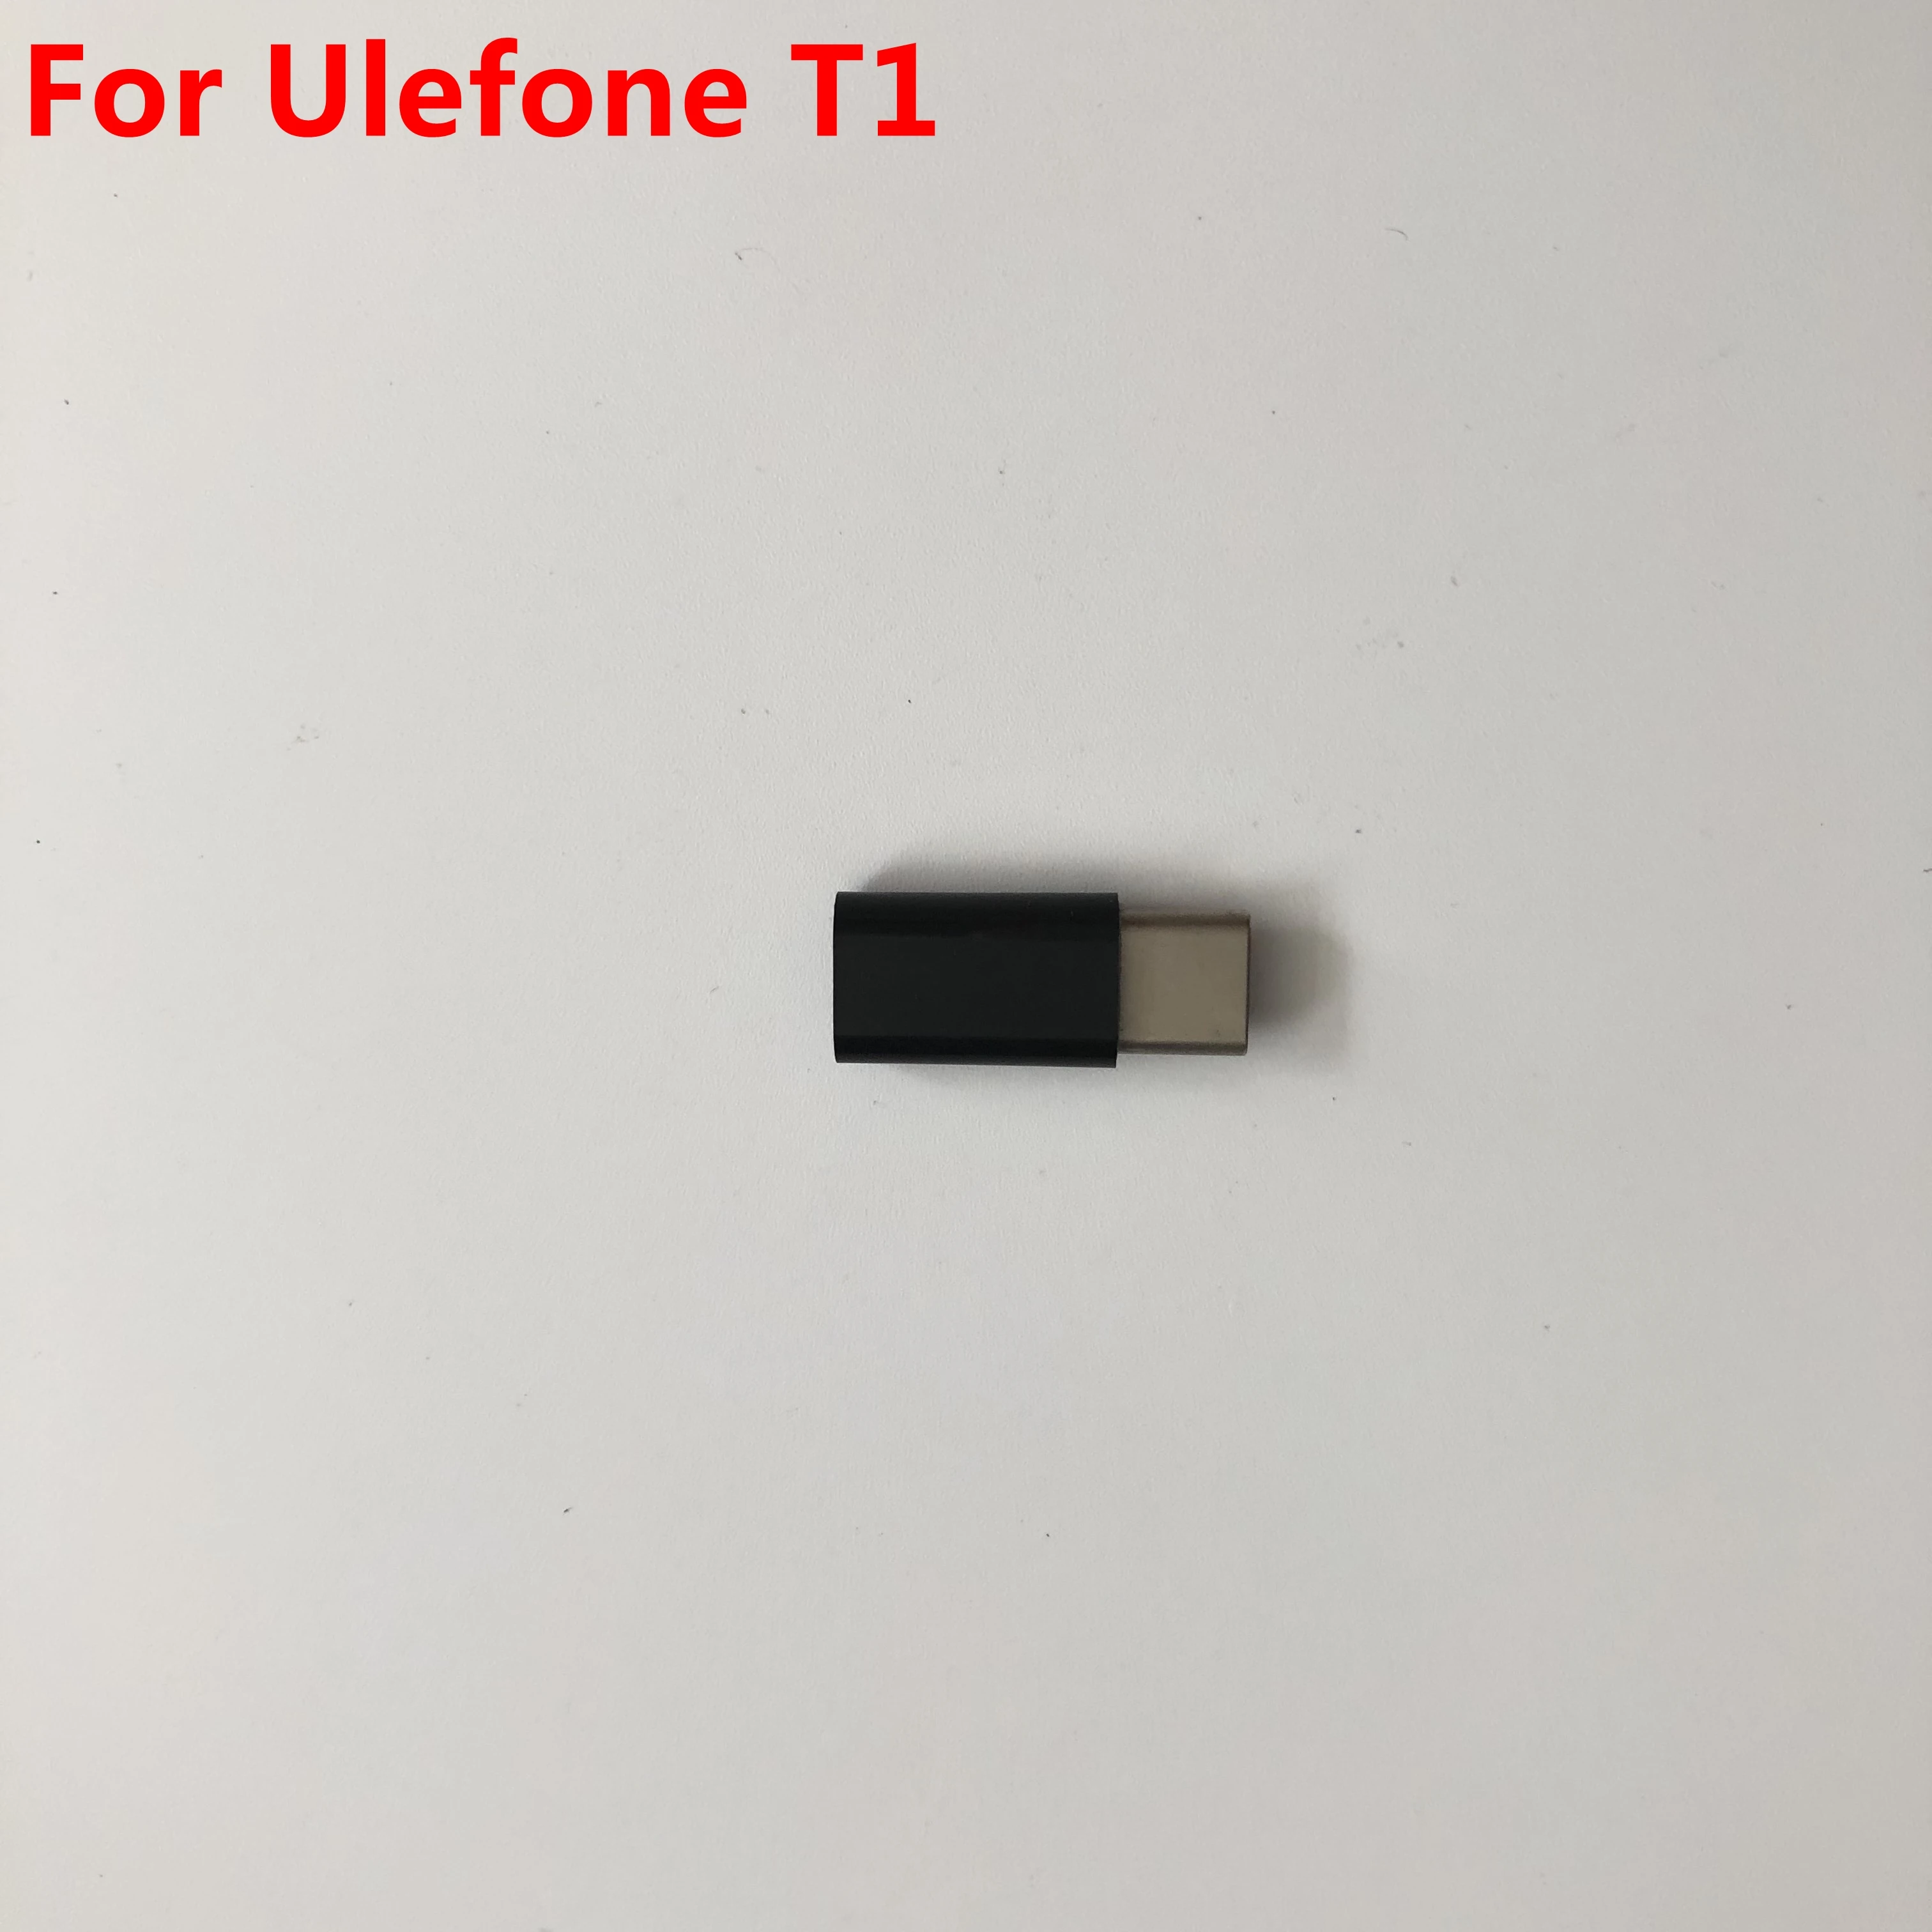 

New Charge Converter For Ulefone T1 MTKHelio P25 Octa Core 5.5 inch 1920 x 1080 Tracking Number